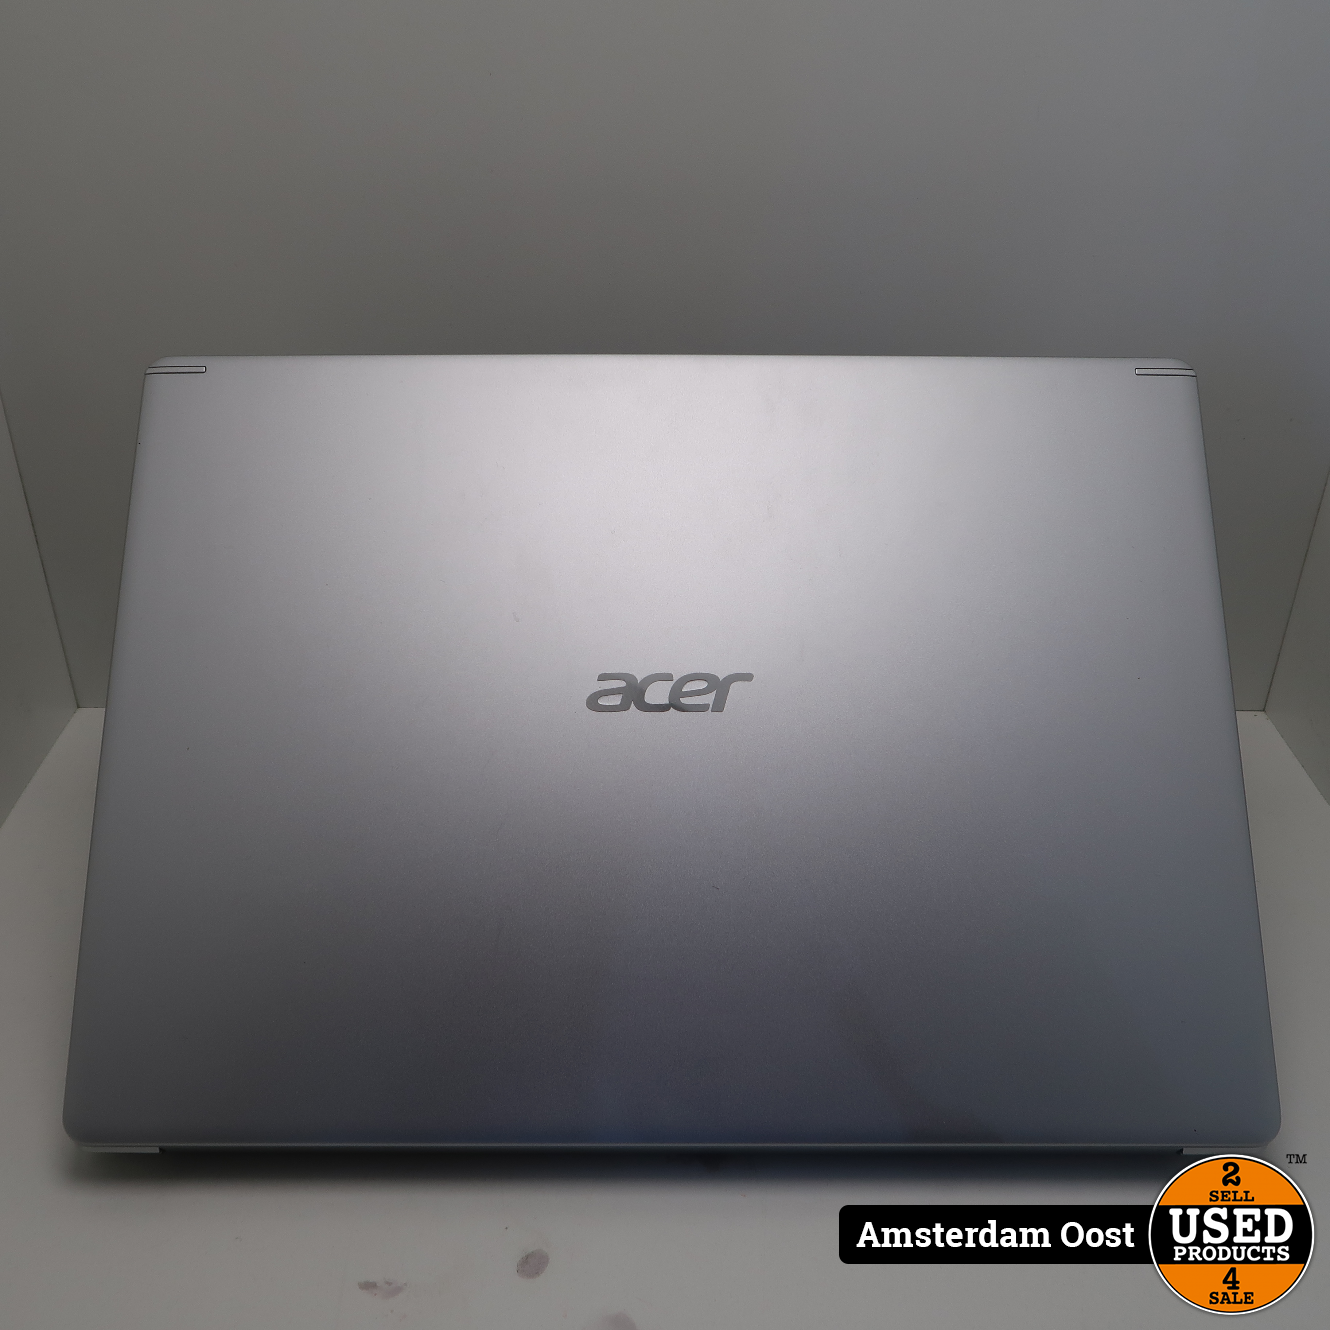 Investeren Veel software Acer Aspire 5 i5/8GB/512GB SSD Laptop | in Nette Staat met Bon - Used  Products Amsterdam Oost